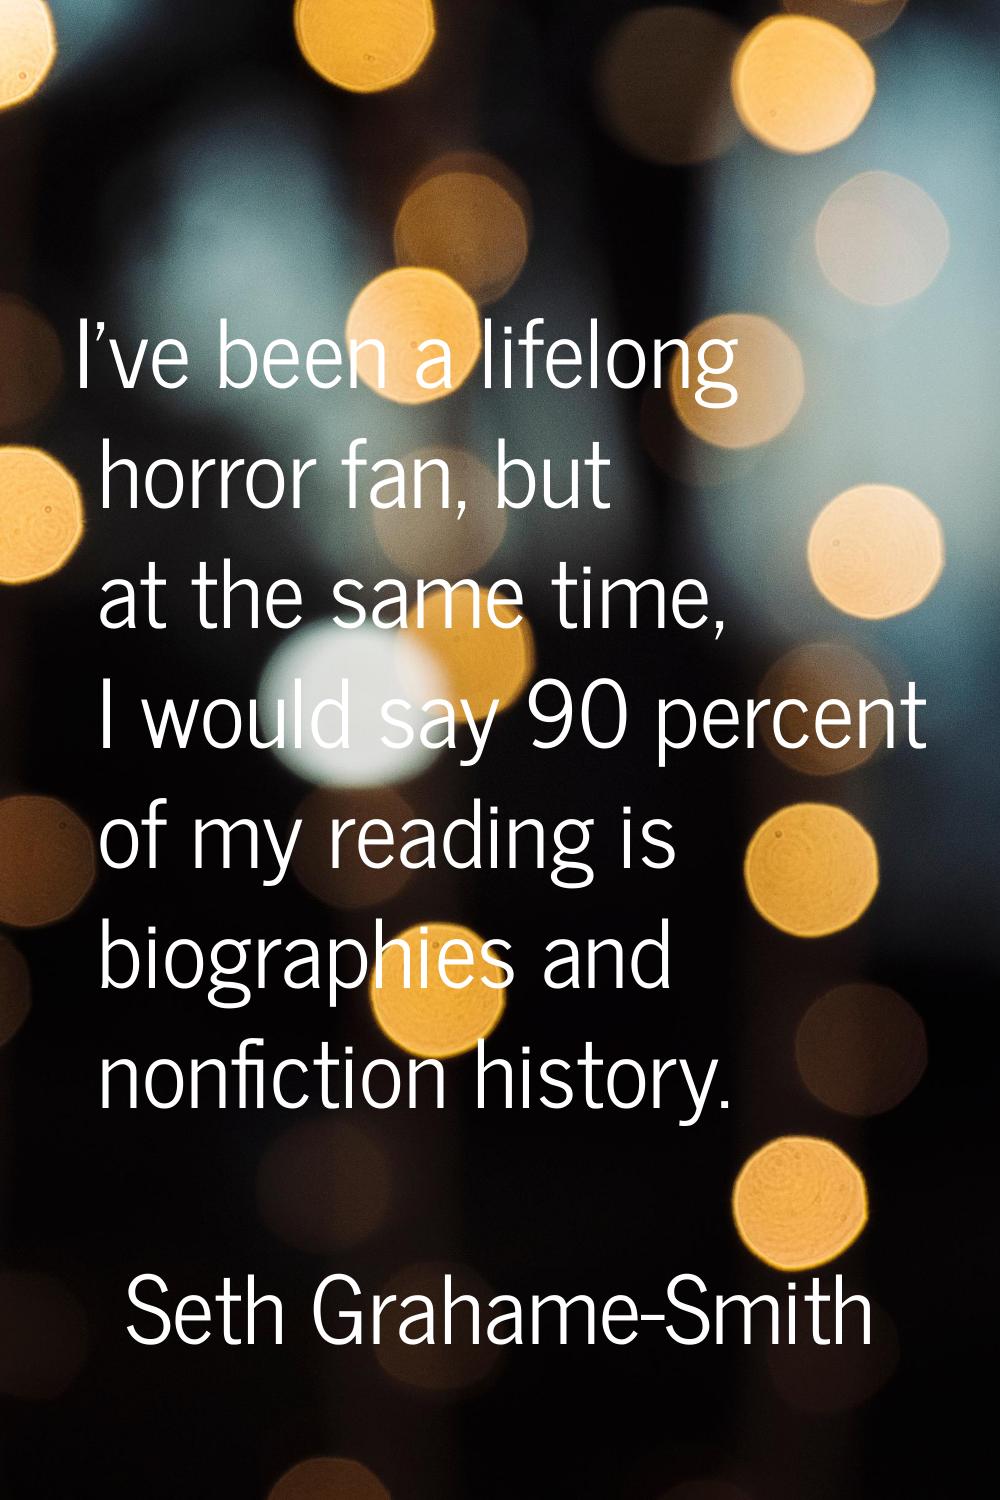 I've been a lifelong horror fan, but at the same time, I would say 90 percent of my reading is biog